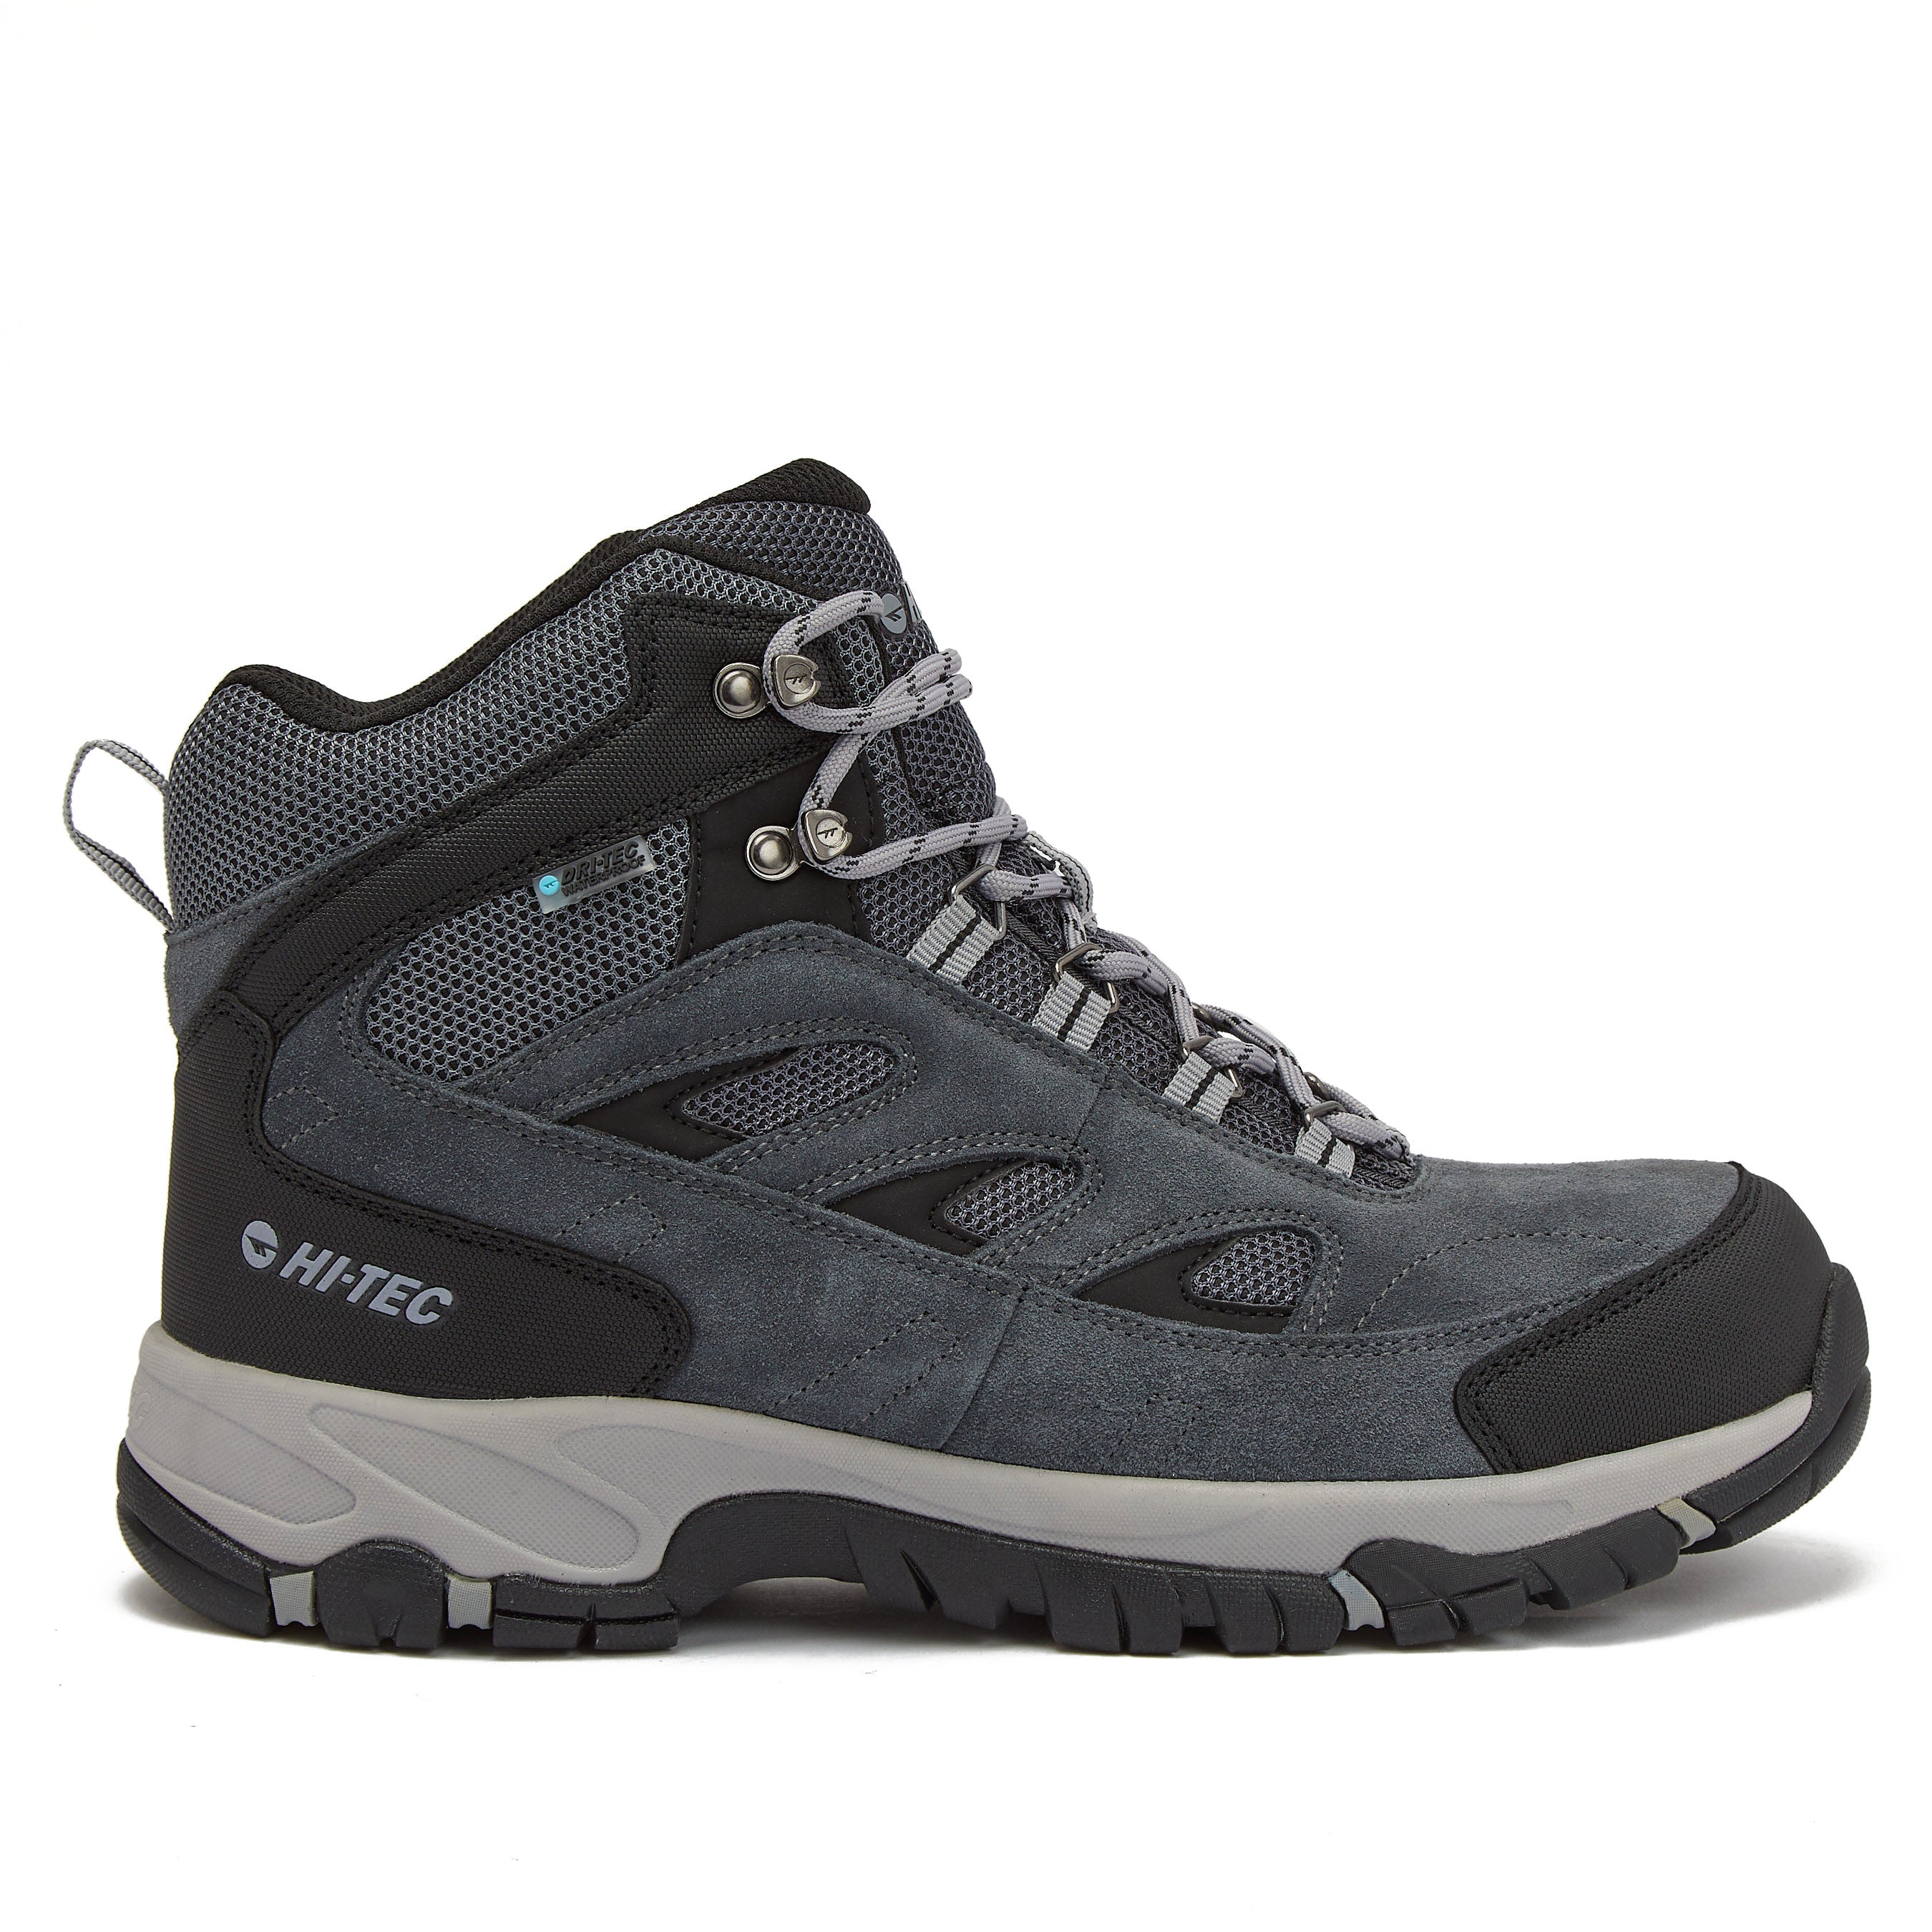 Boots Women Hiking Trail – Hi-Tec Men and for & Shoes